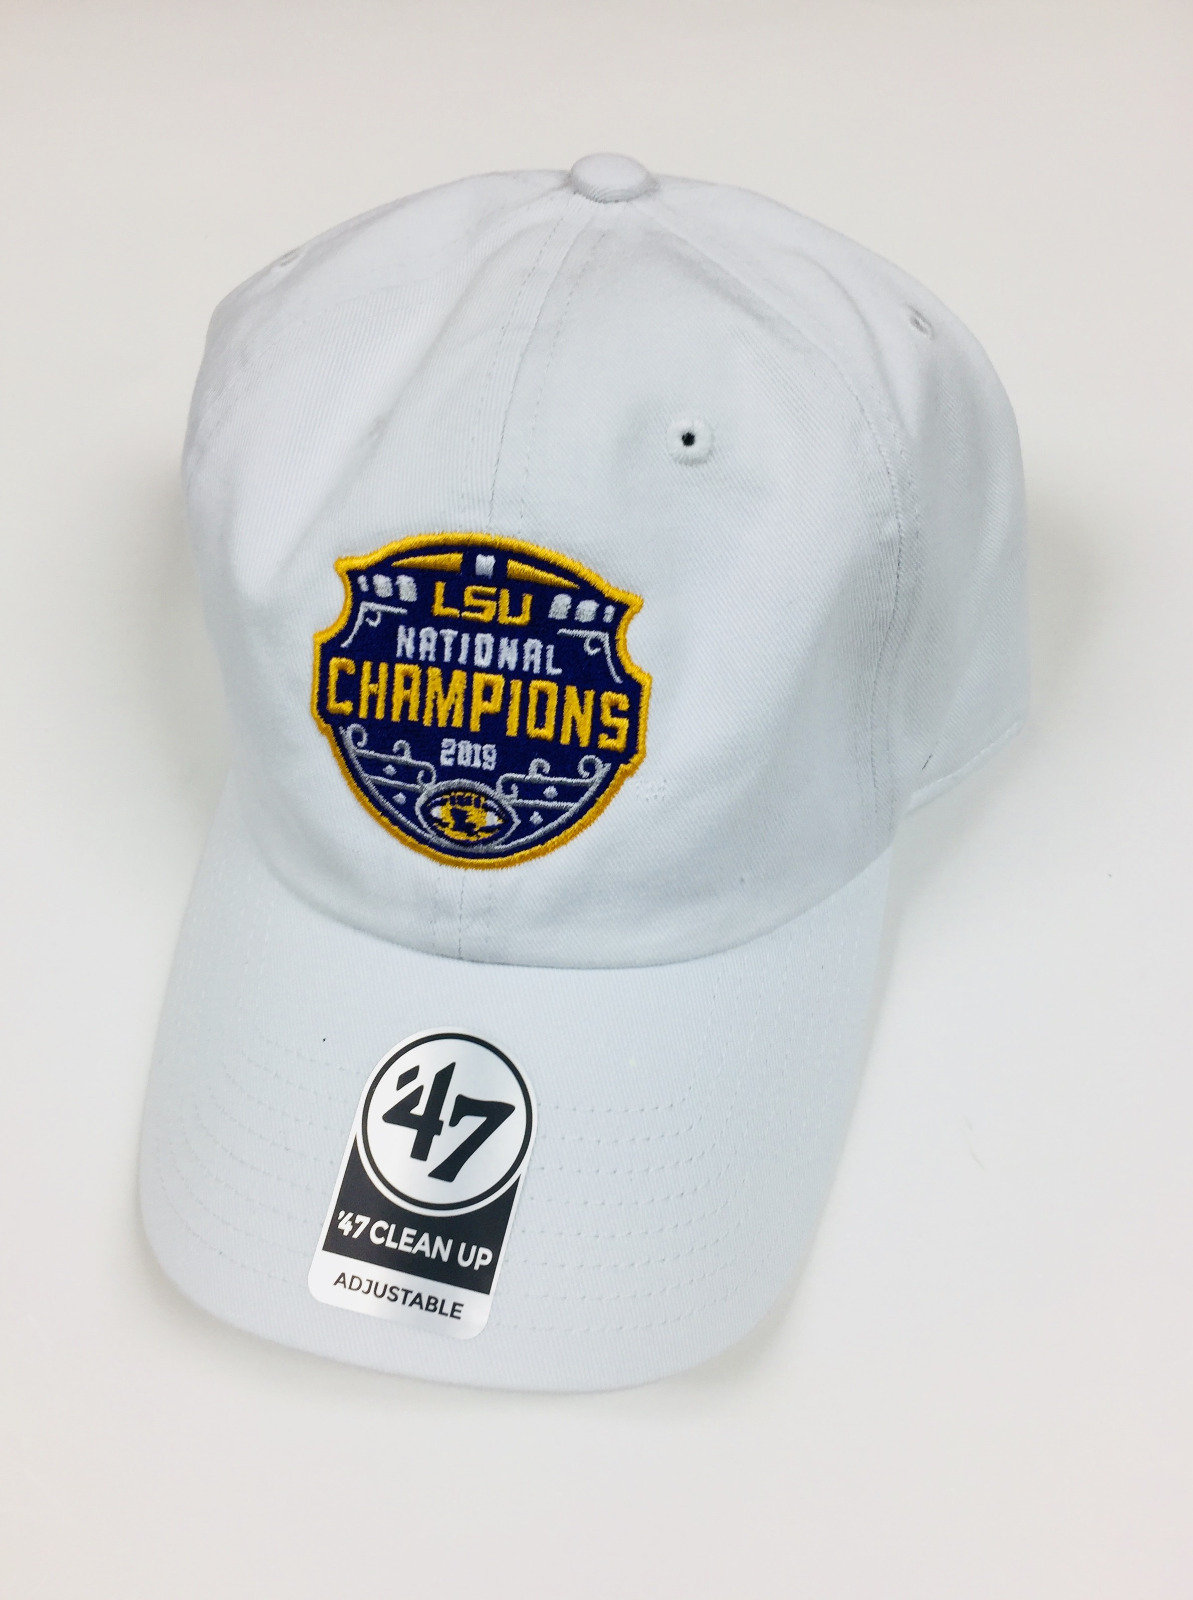 LSU Tigers 2019 National Champions Hat White NEW '47 Clean Up ...